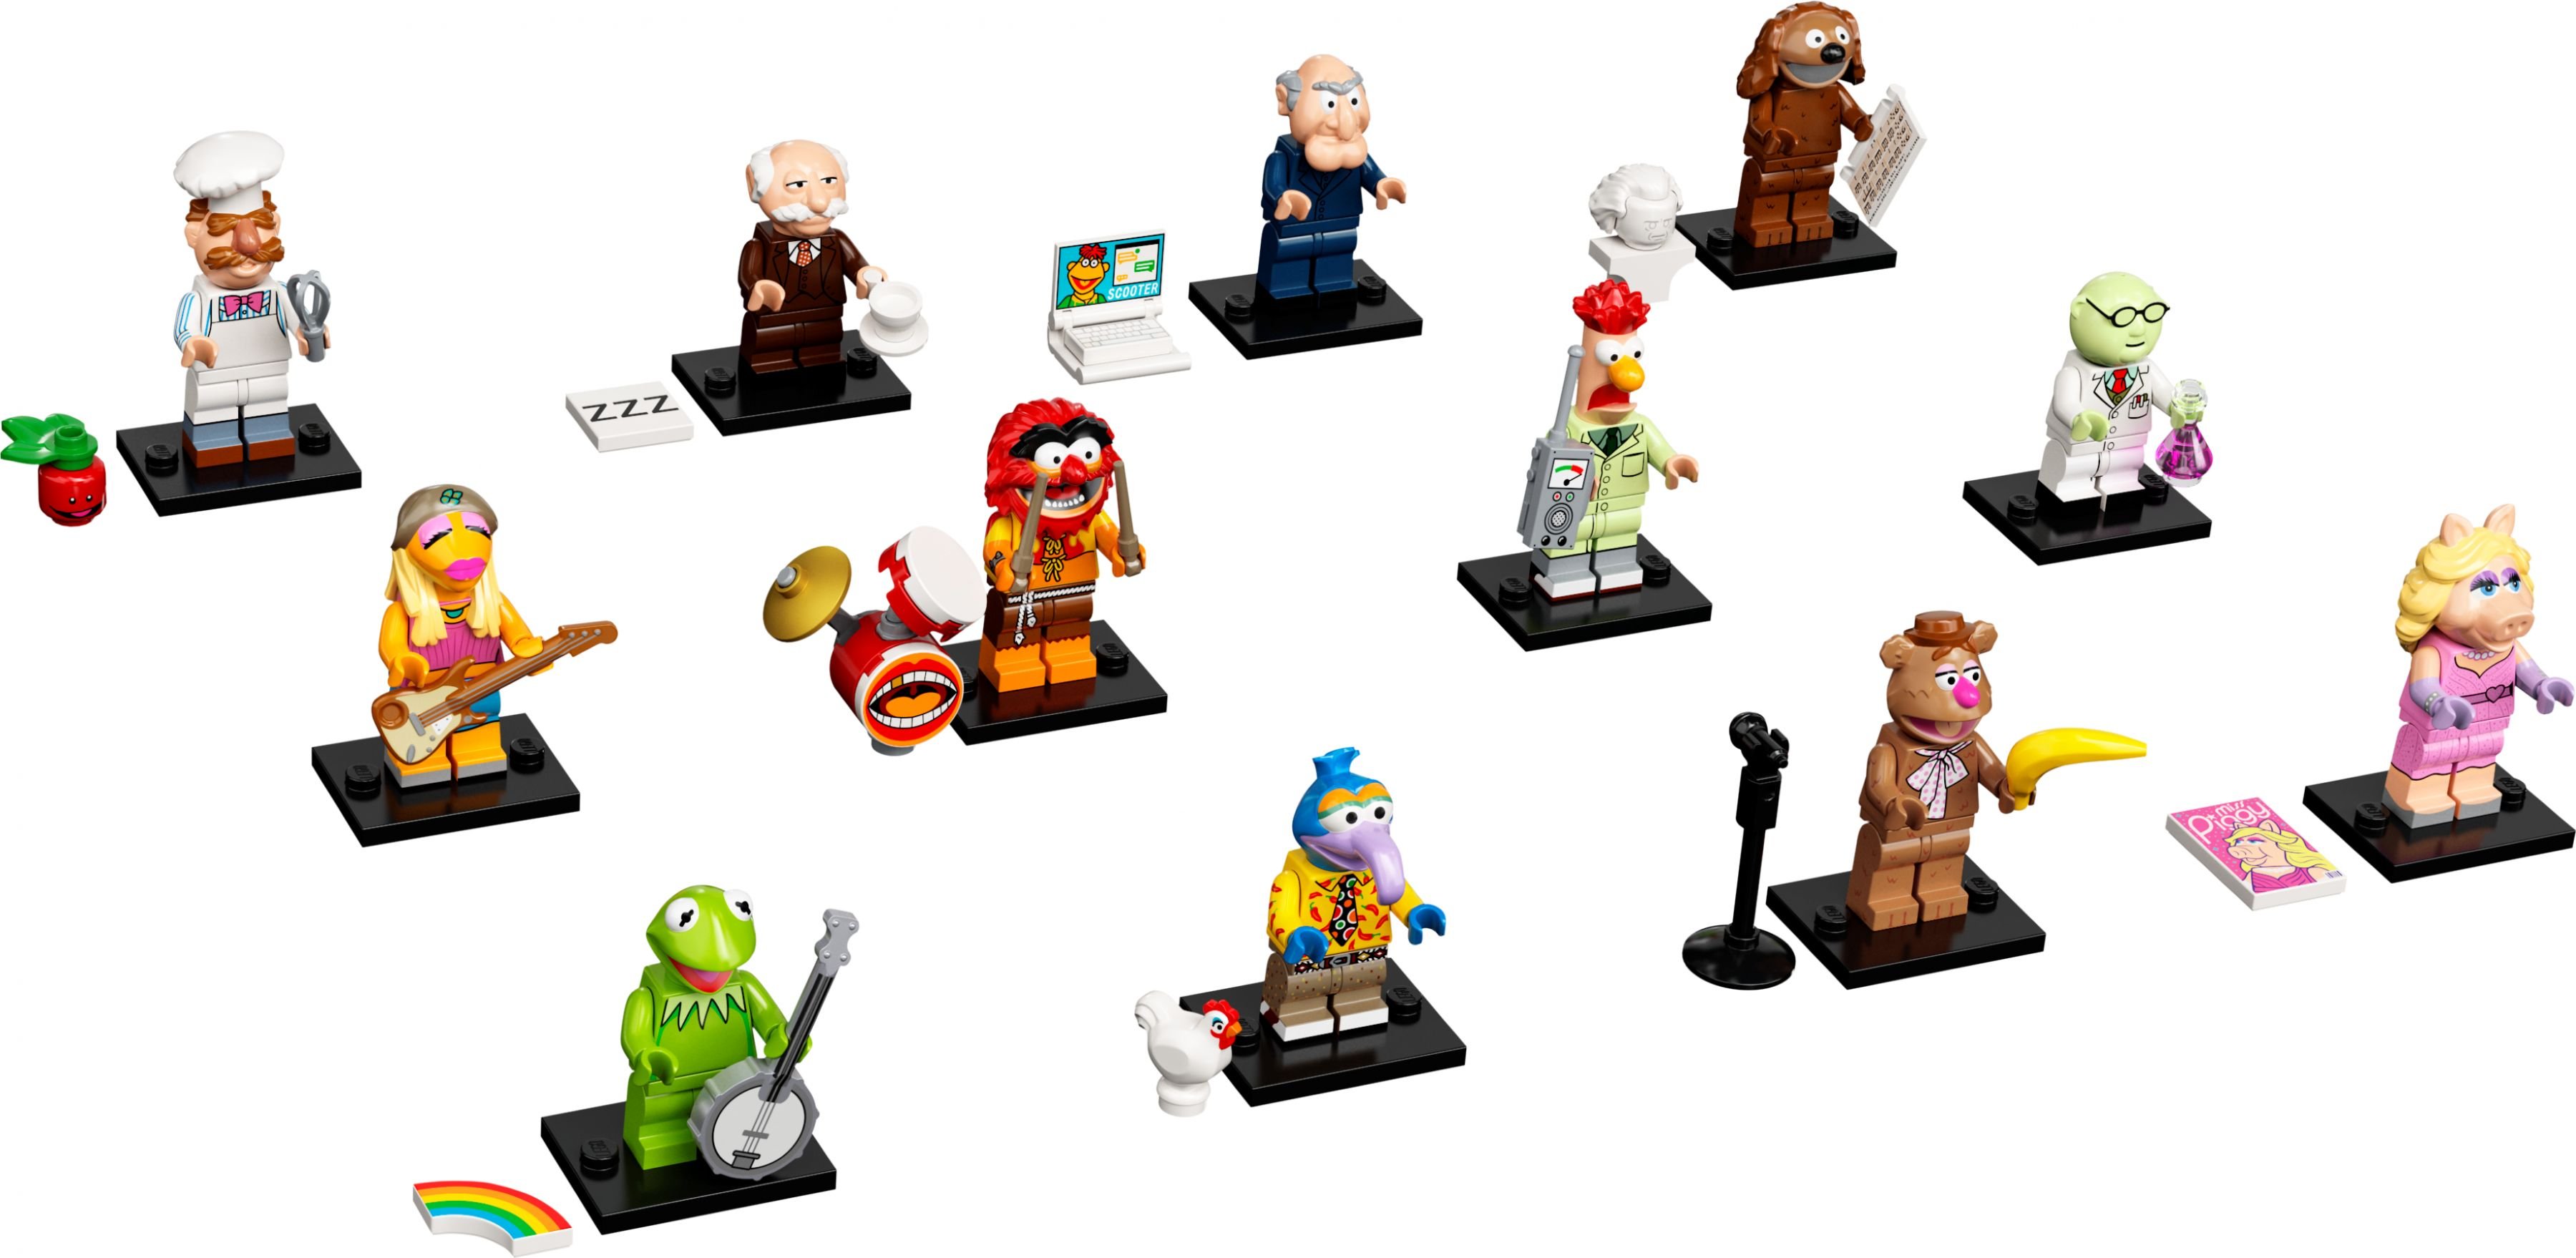 LEGO Collectable Minifigures 71033 LEGO® The Muppets Series – 36er Box LEGO_71033.jpg